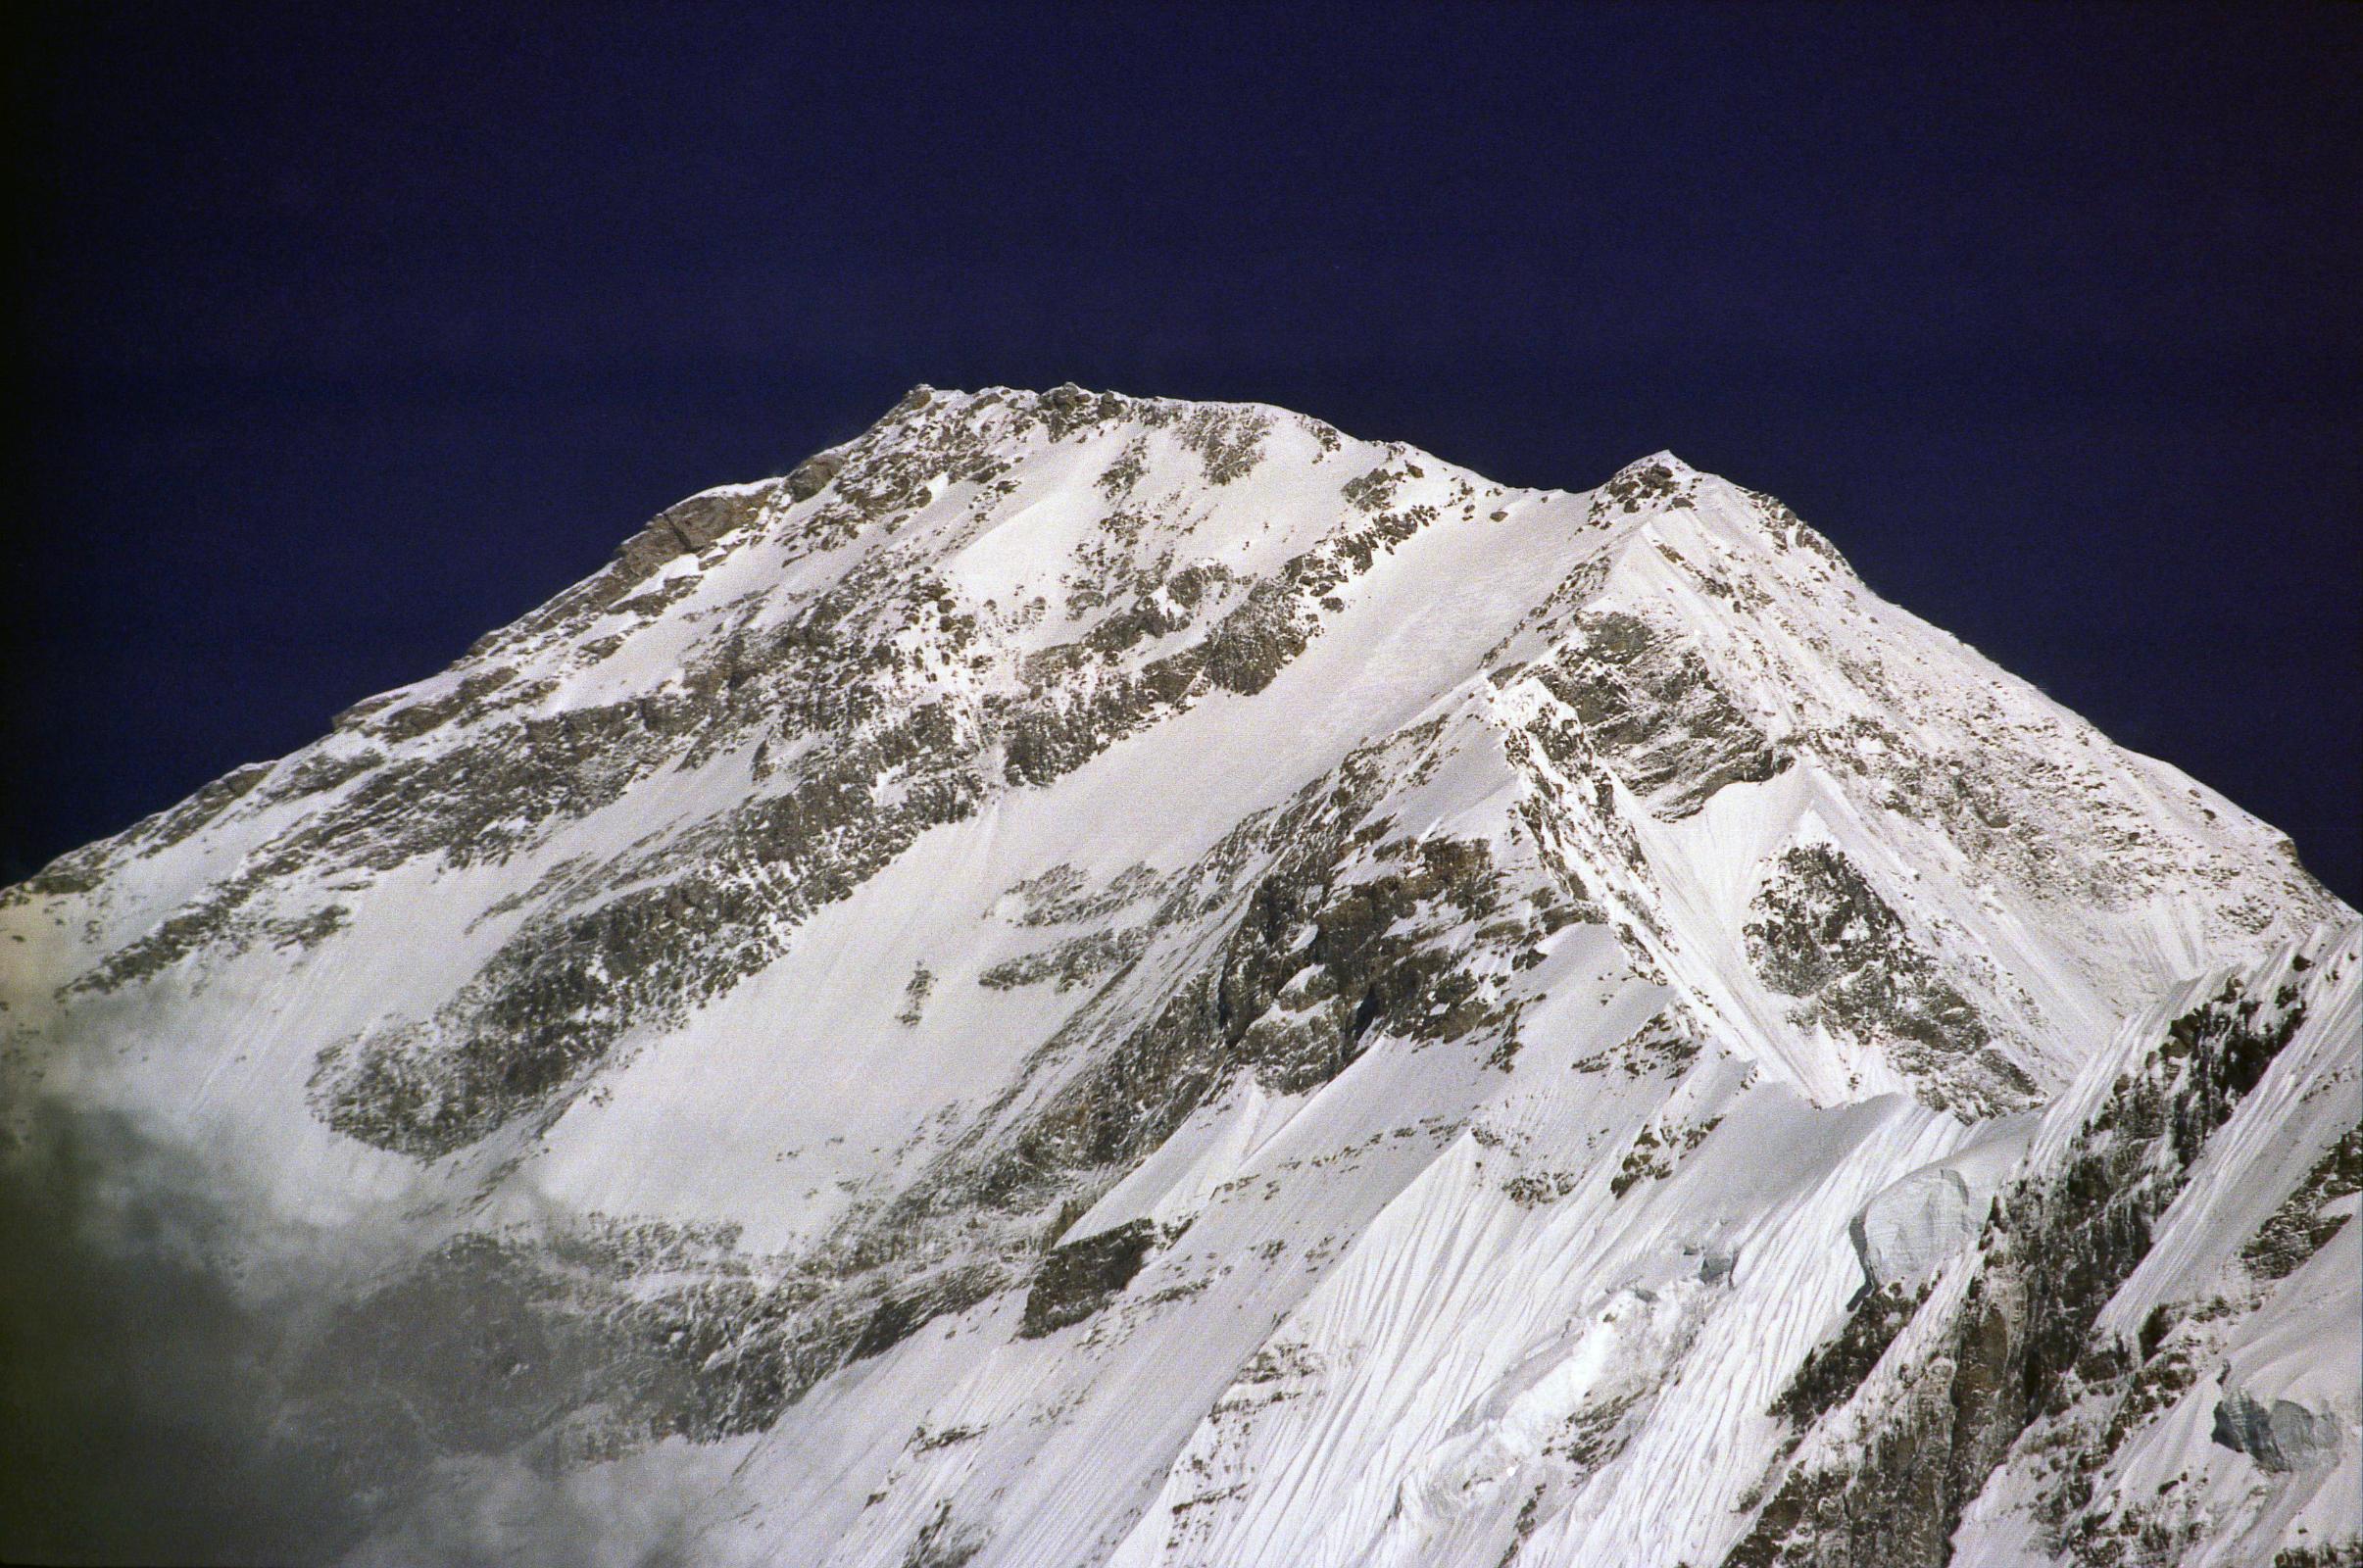 408 Dhaulagiri South Face Close Up Early Morning From Lete Next morning Noyelle woke us early: 